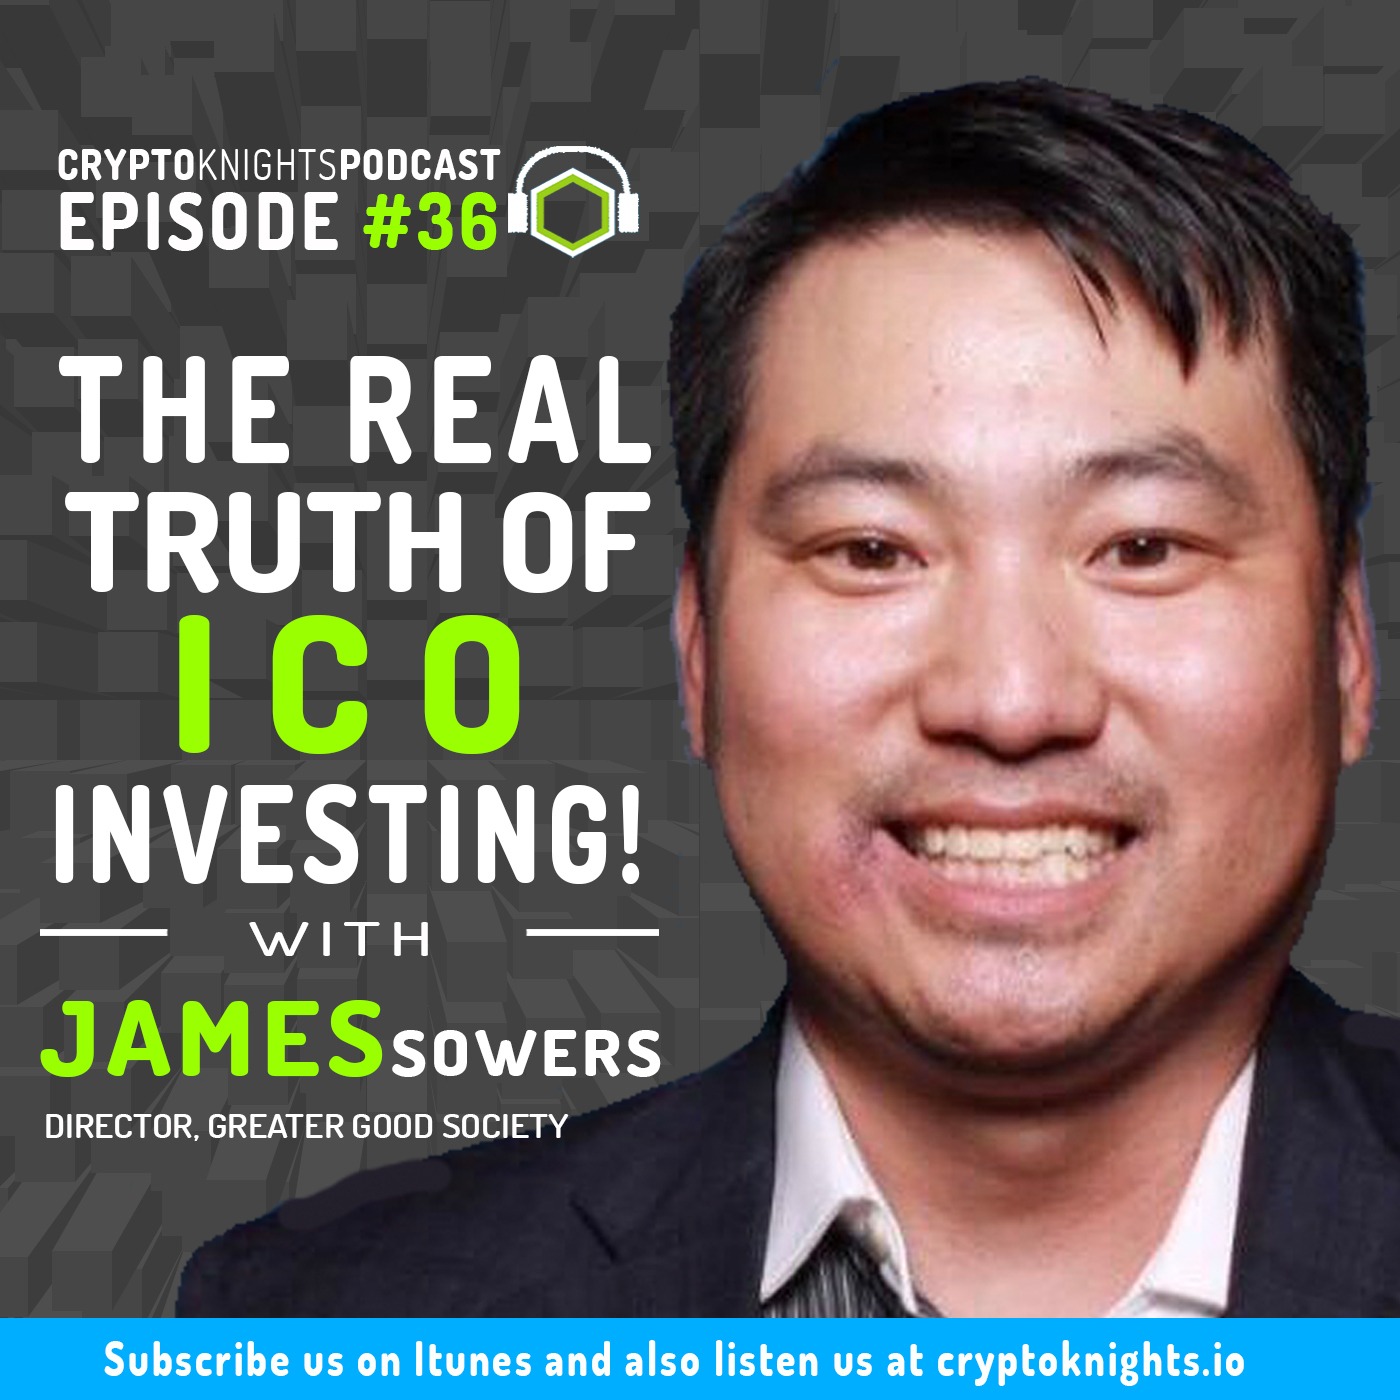 Episode 36- THE REAL TRUTH OF ICO INVESTING!